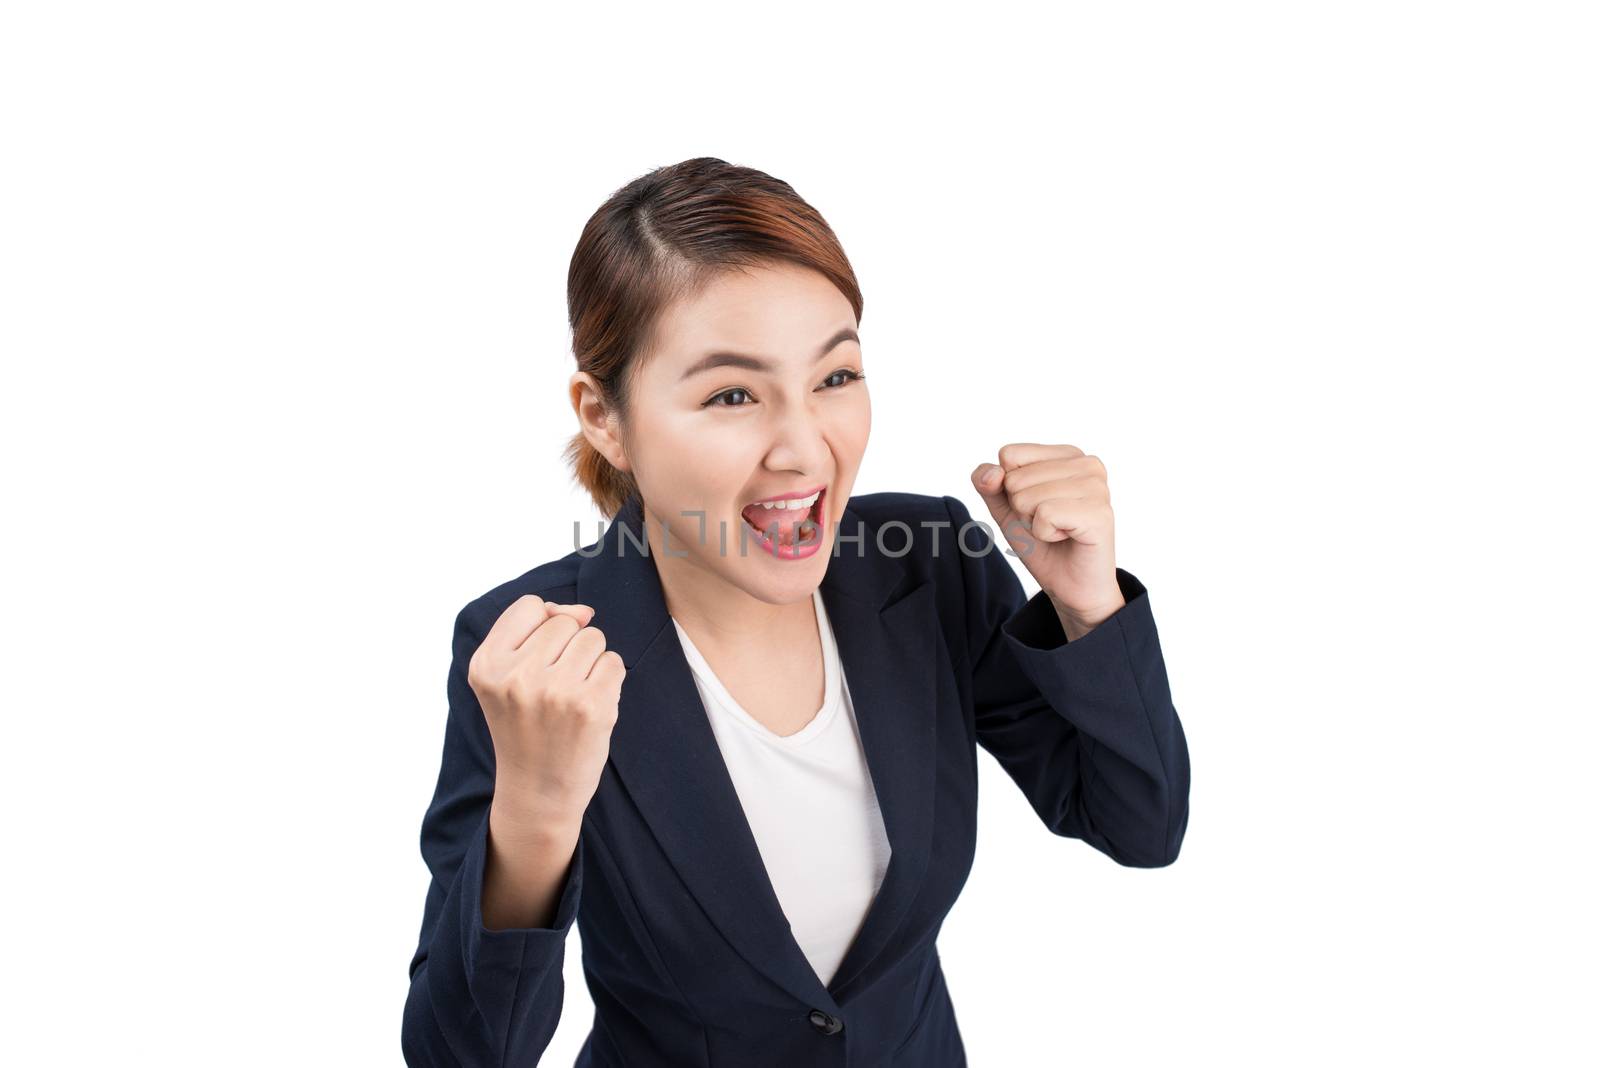 Close-up of an excited businesswoman celebrating with arms up by makidotvn